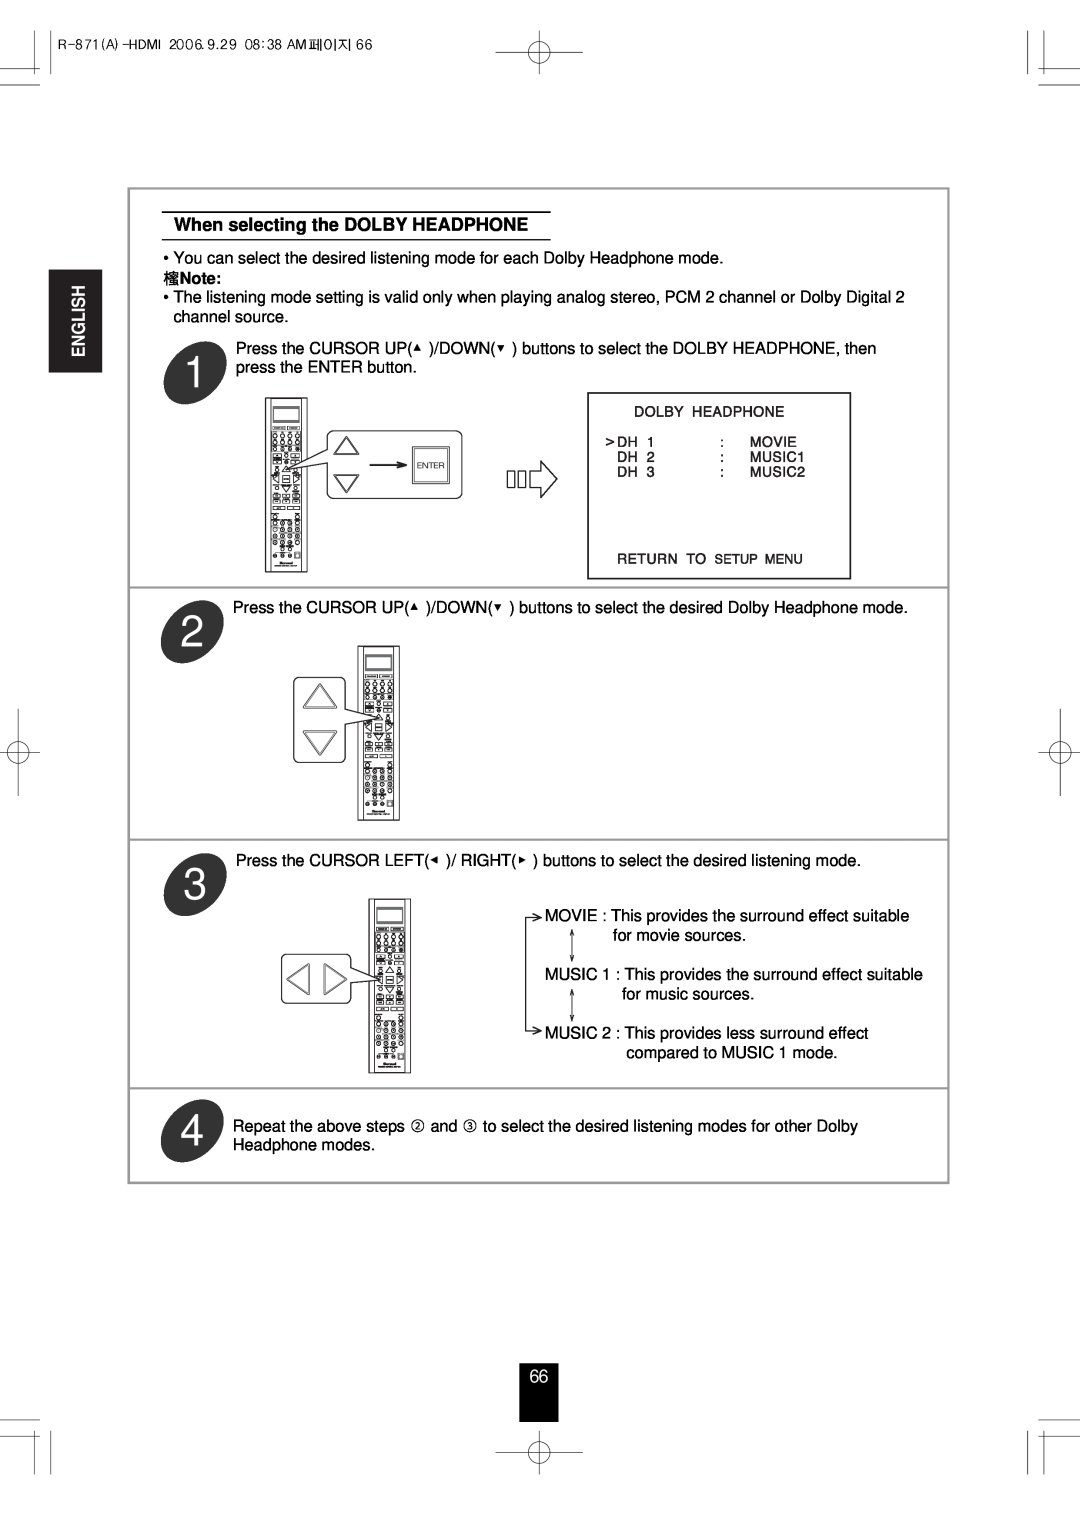 Sherwood R-871 manual When selecting the DOLBY HEADPHONE, English 